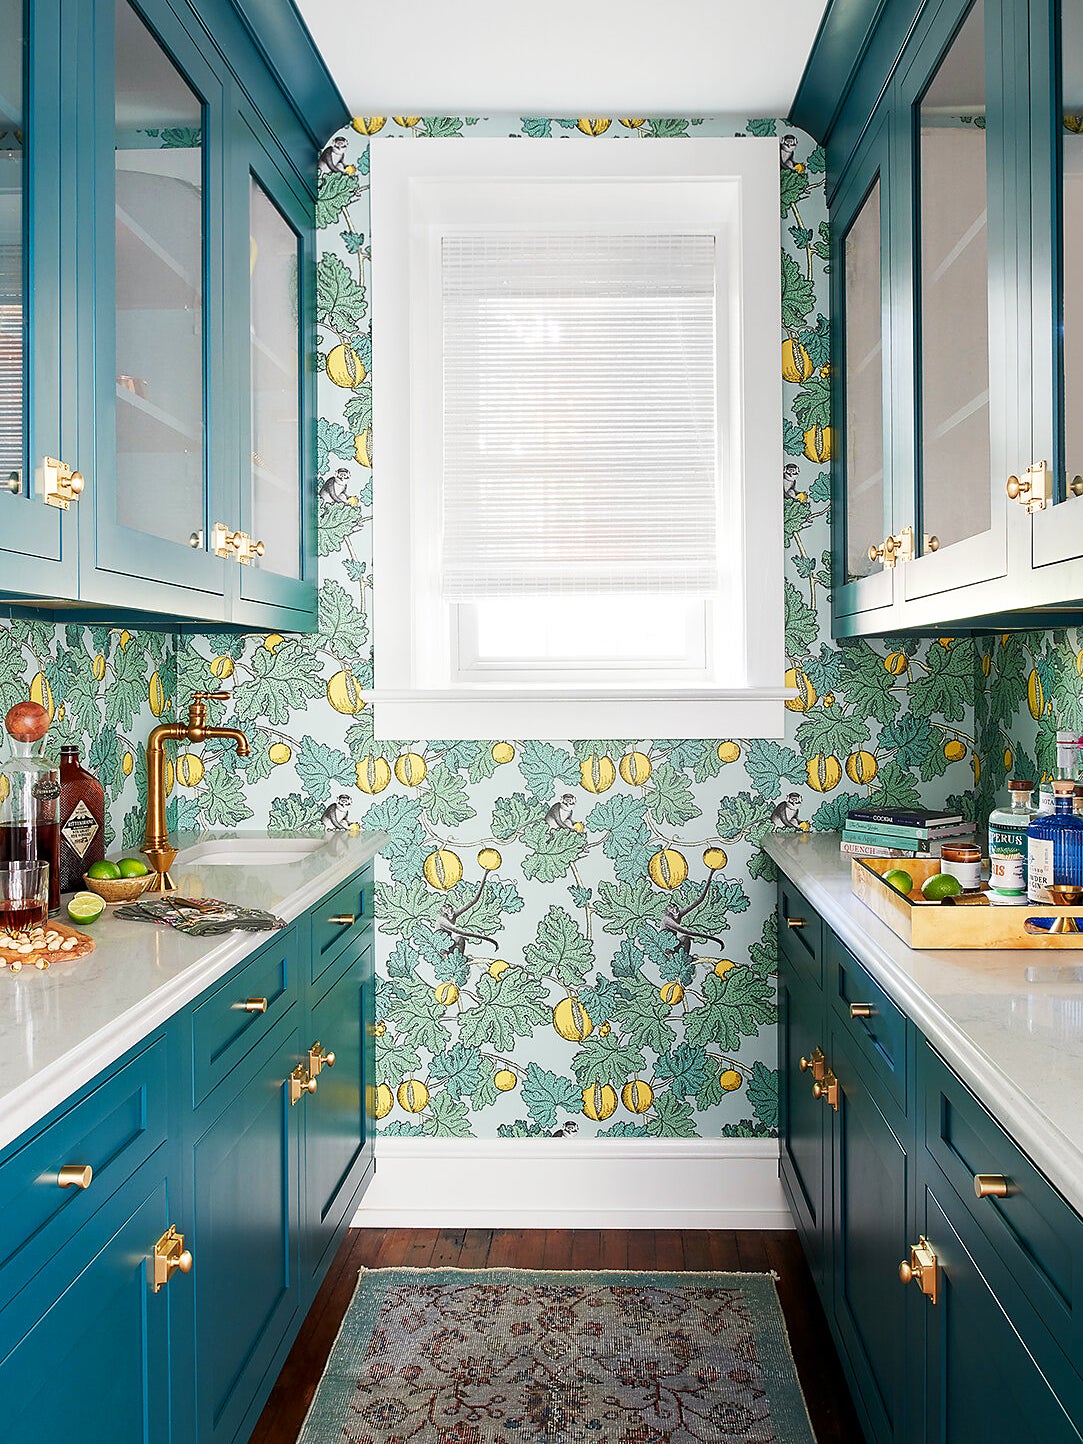 Teal pantry with fruit wallpaper